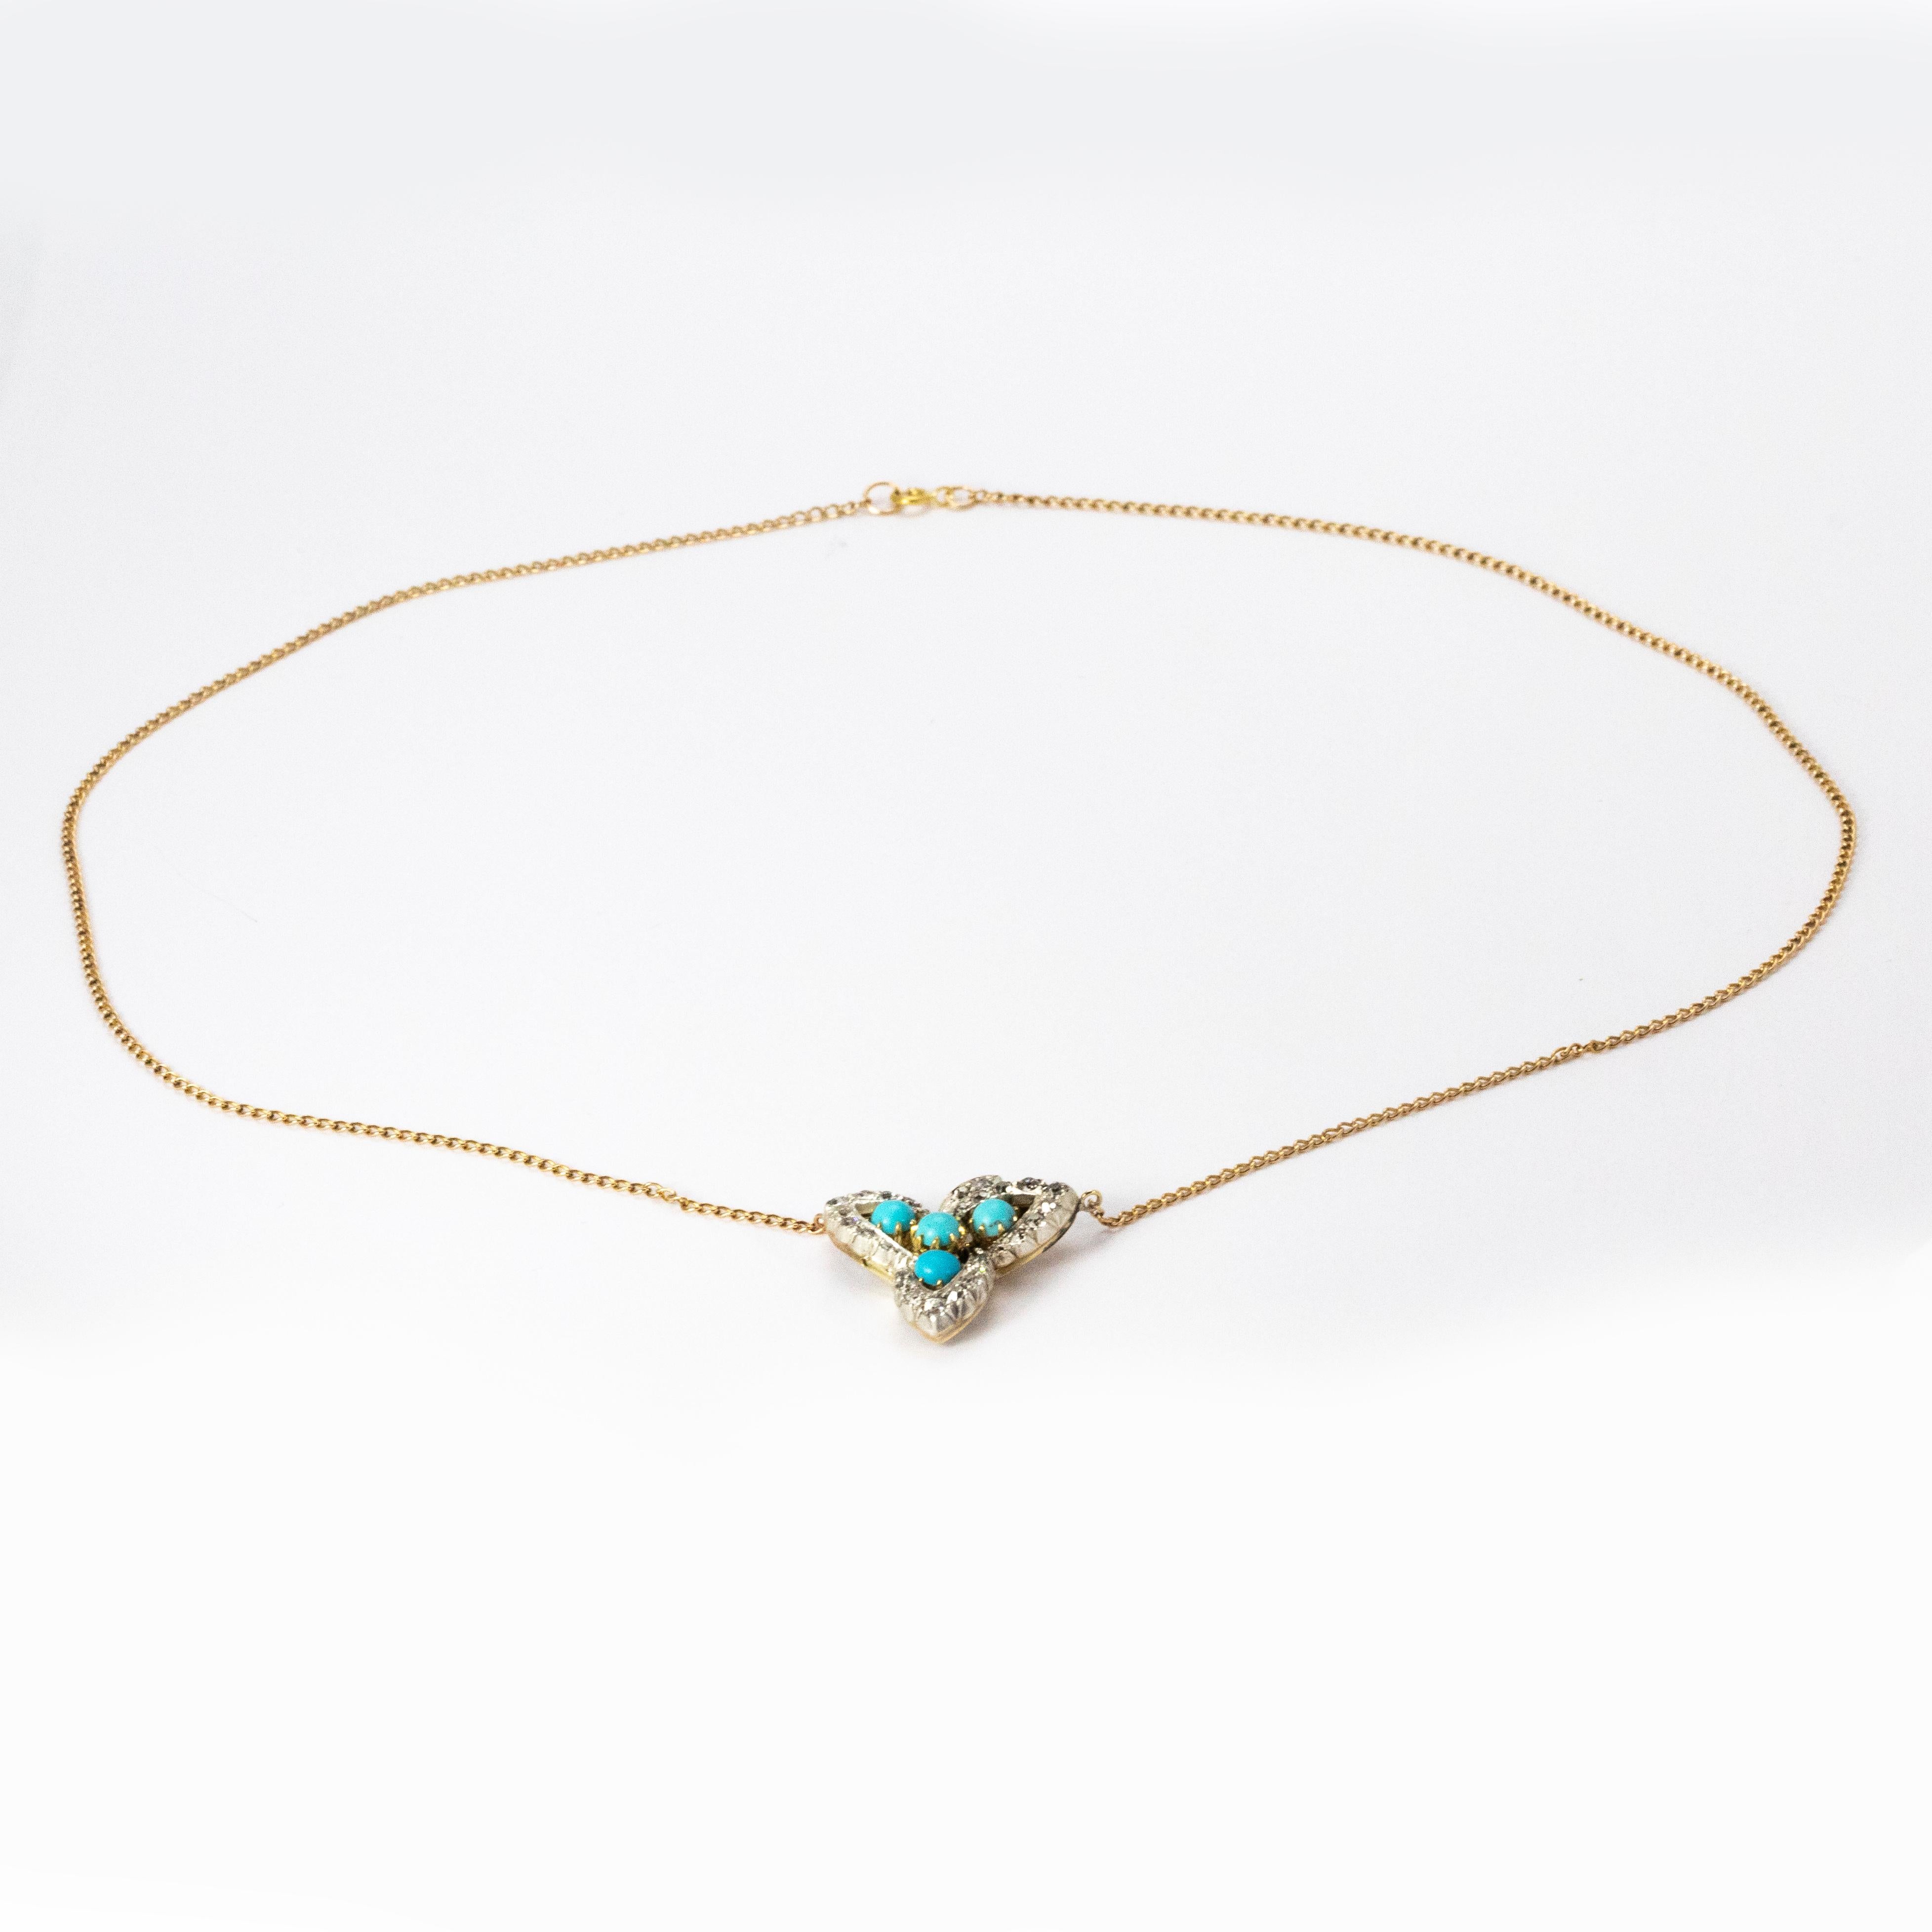 A stunning leaf shaped pendant from the Victorian Era. The pendant is elegantly outlined by 1 carat of old European cut diamonds, centrally set with beautiful turquoise and modelled in 18 karat yellow gold. The pendant is completed with a 9 karat